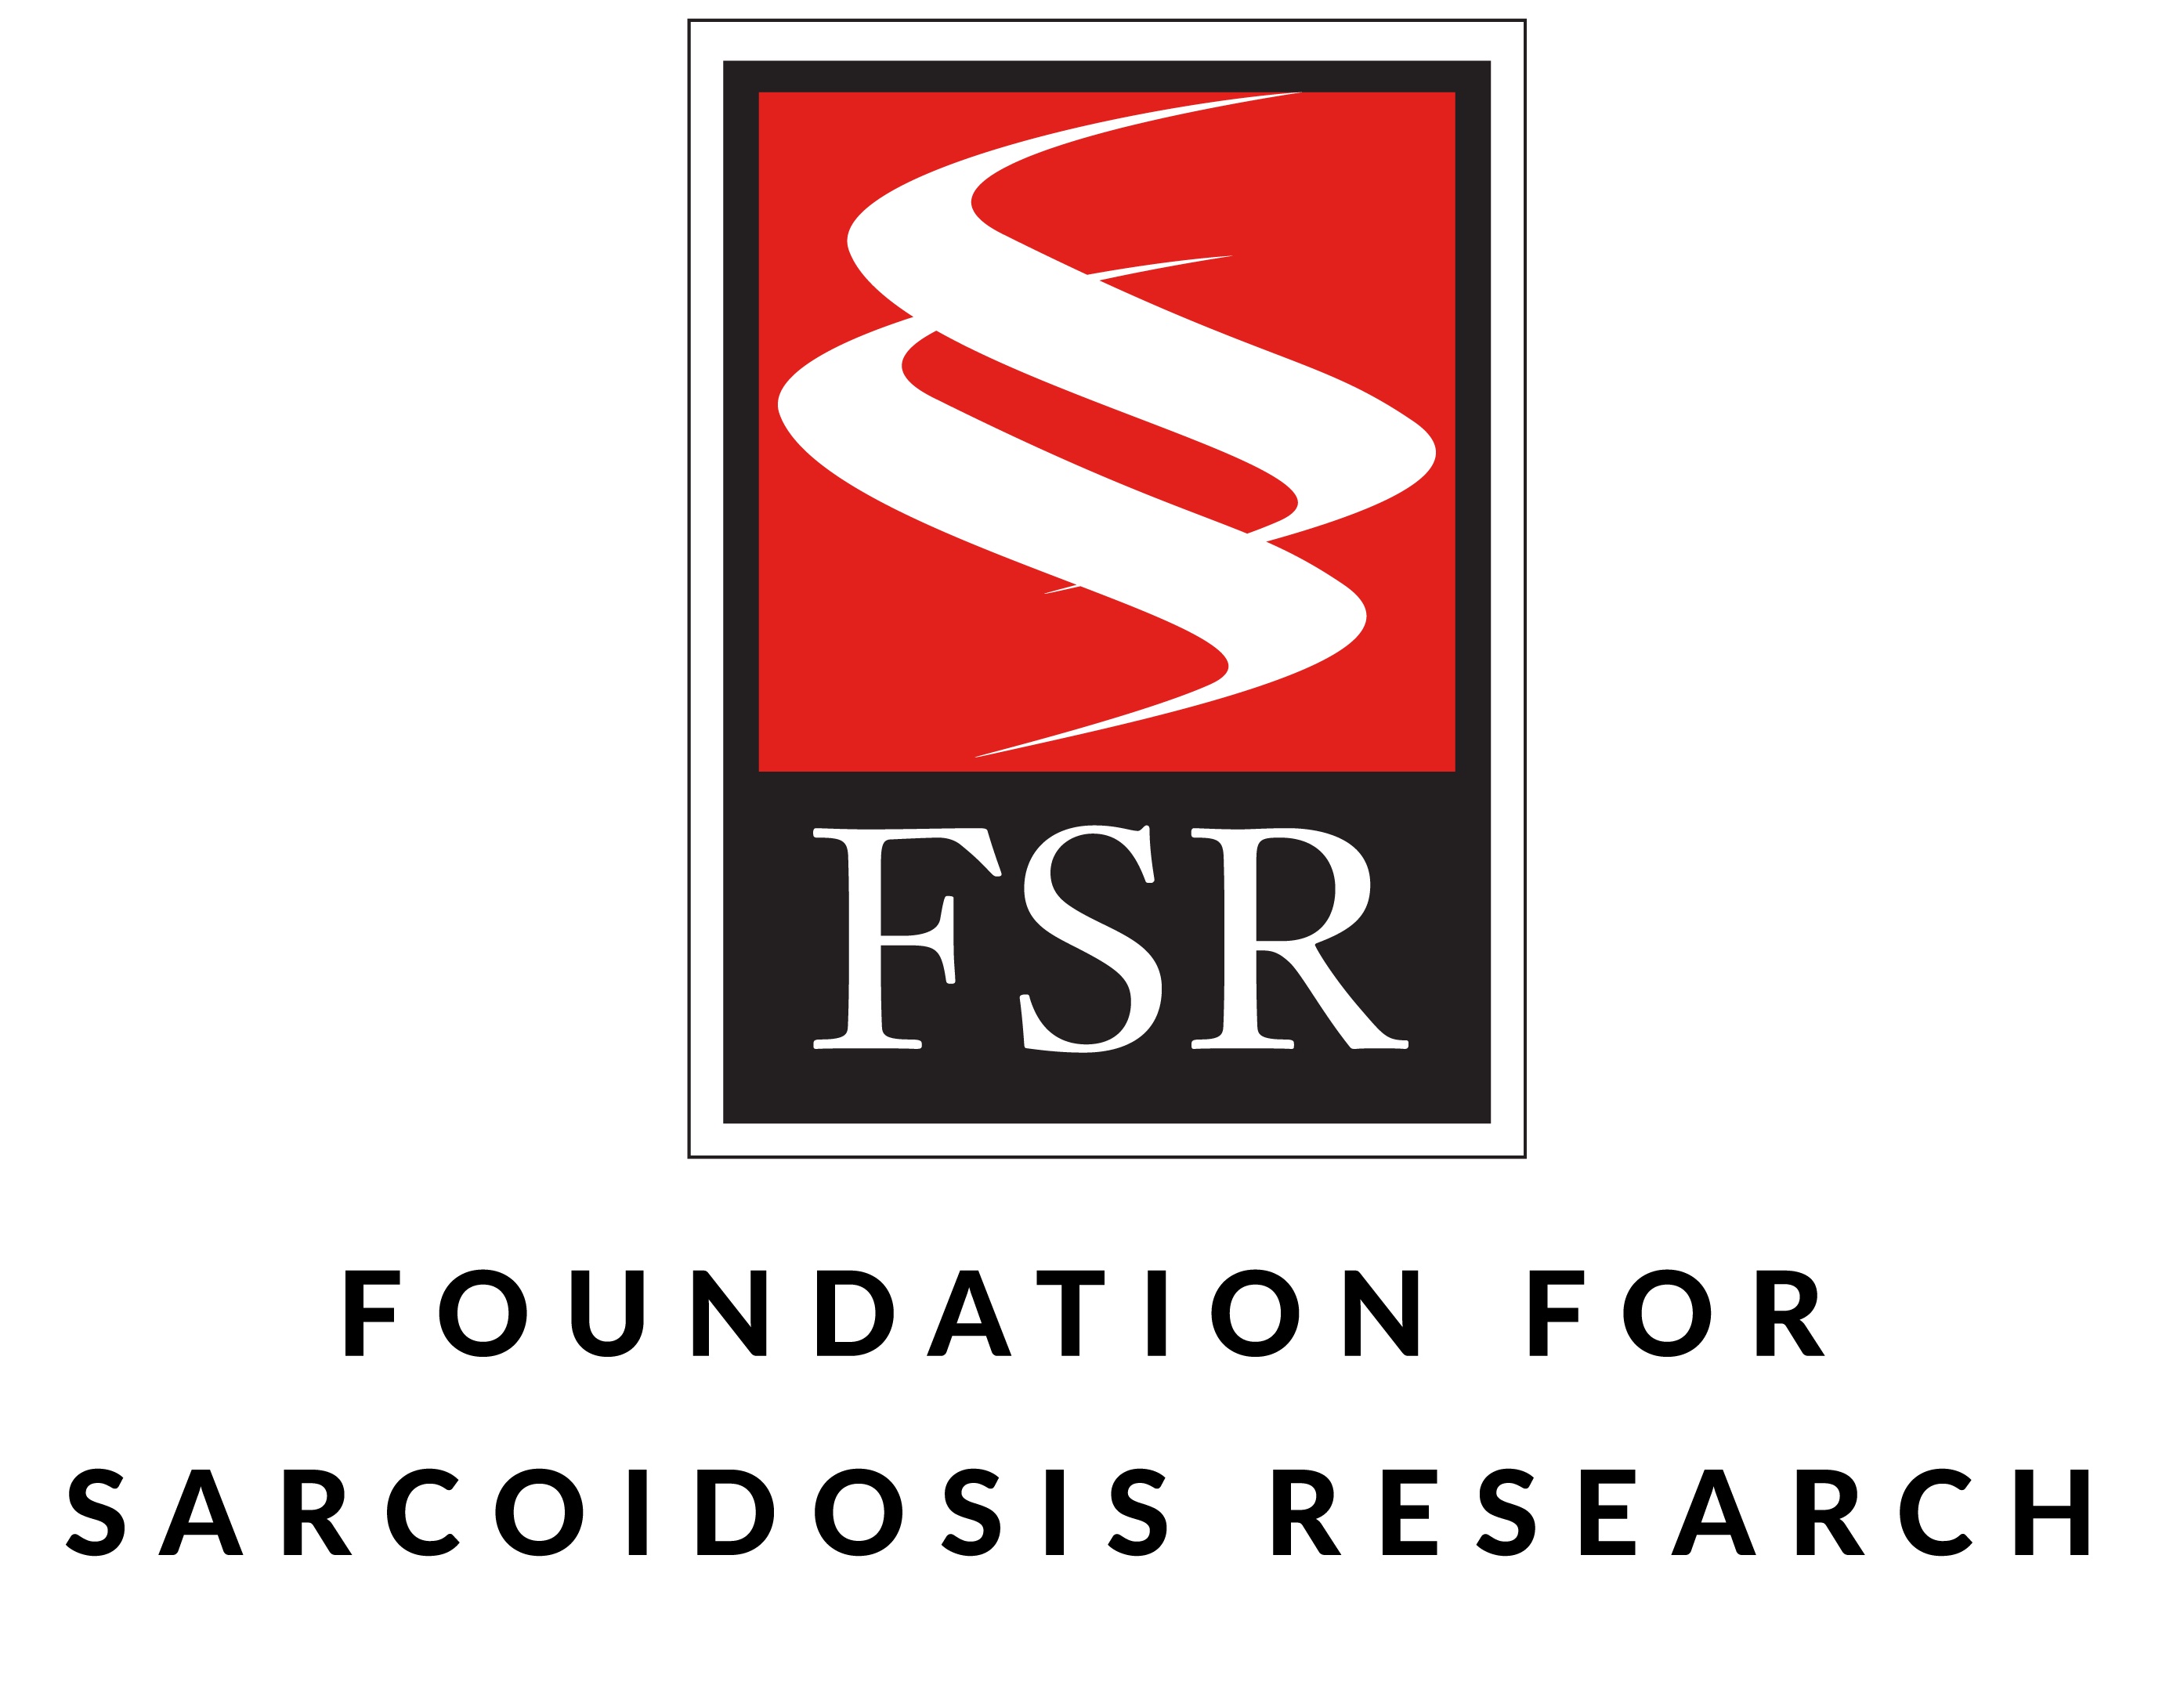 Picture of Foundation for Sarcoidosis Research logo